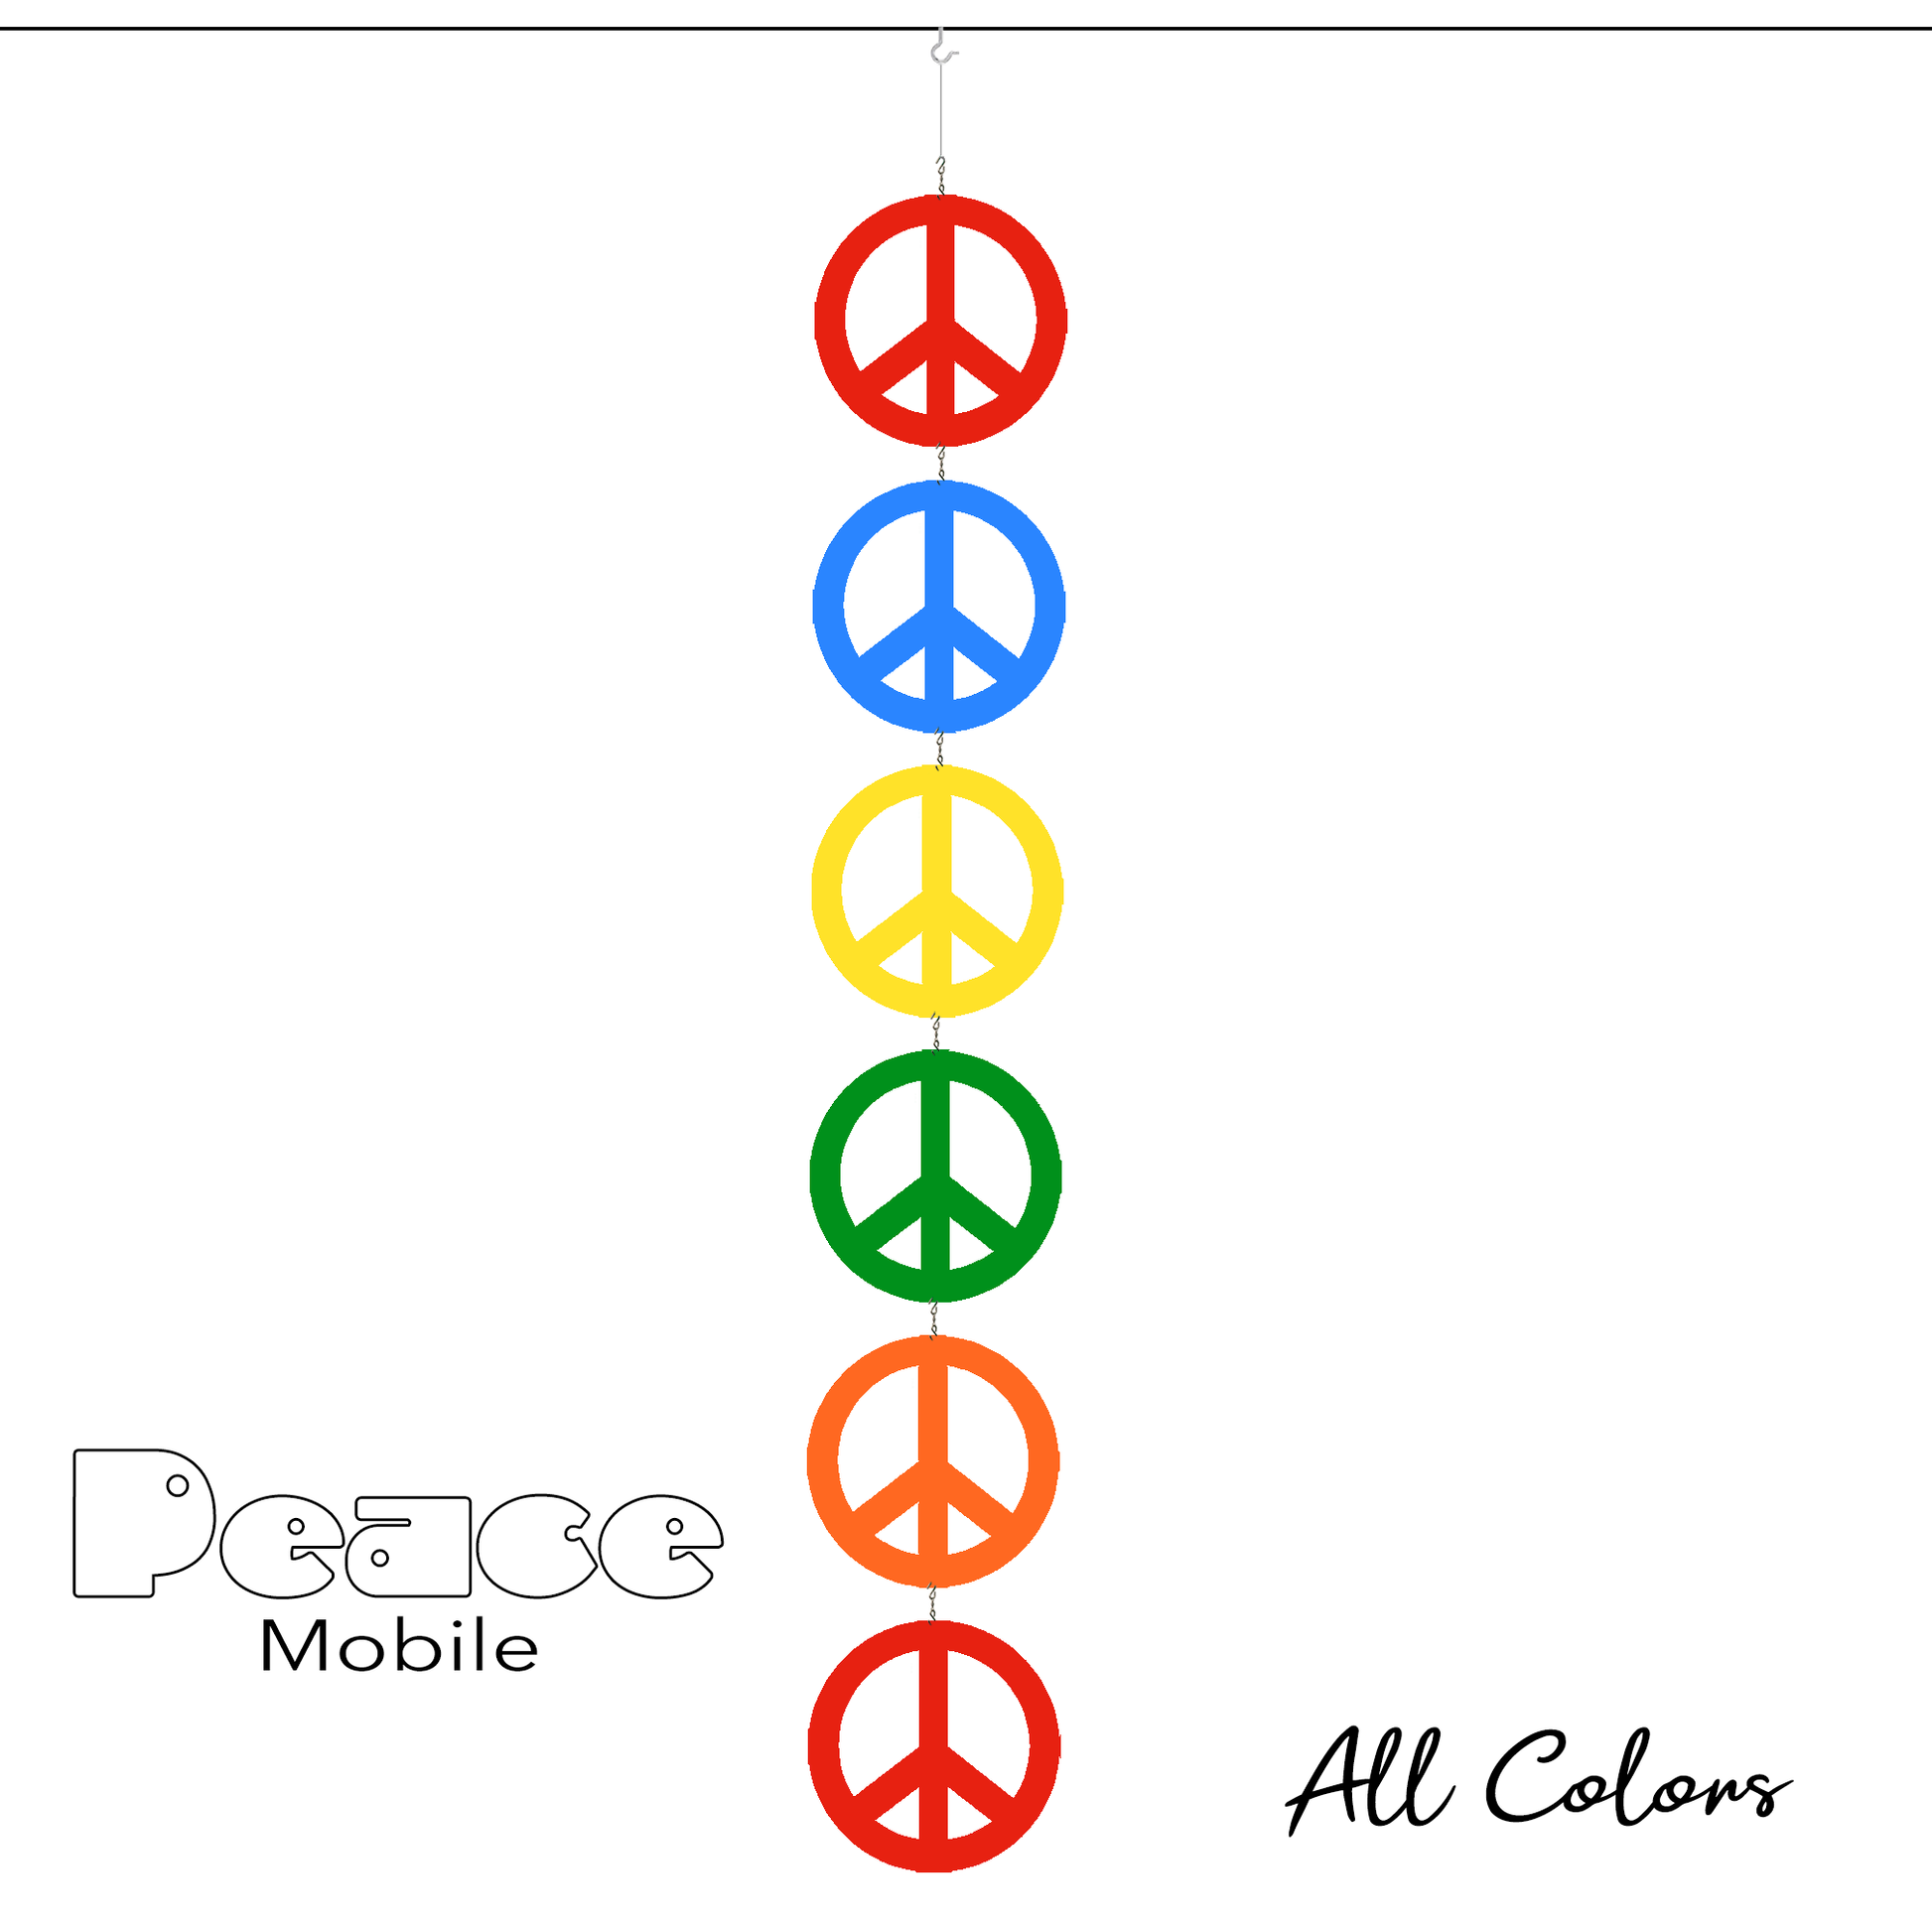 All Colors Peace Mobile - 6 Peace signs in red, blue, yellow, green, orange - kinetic hanging art mobile symbolizes World Peace - by AtomicMobiles.com